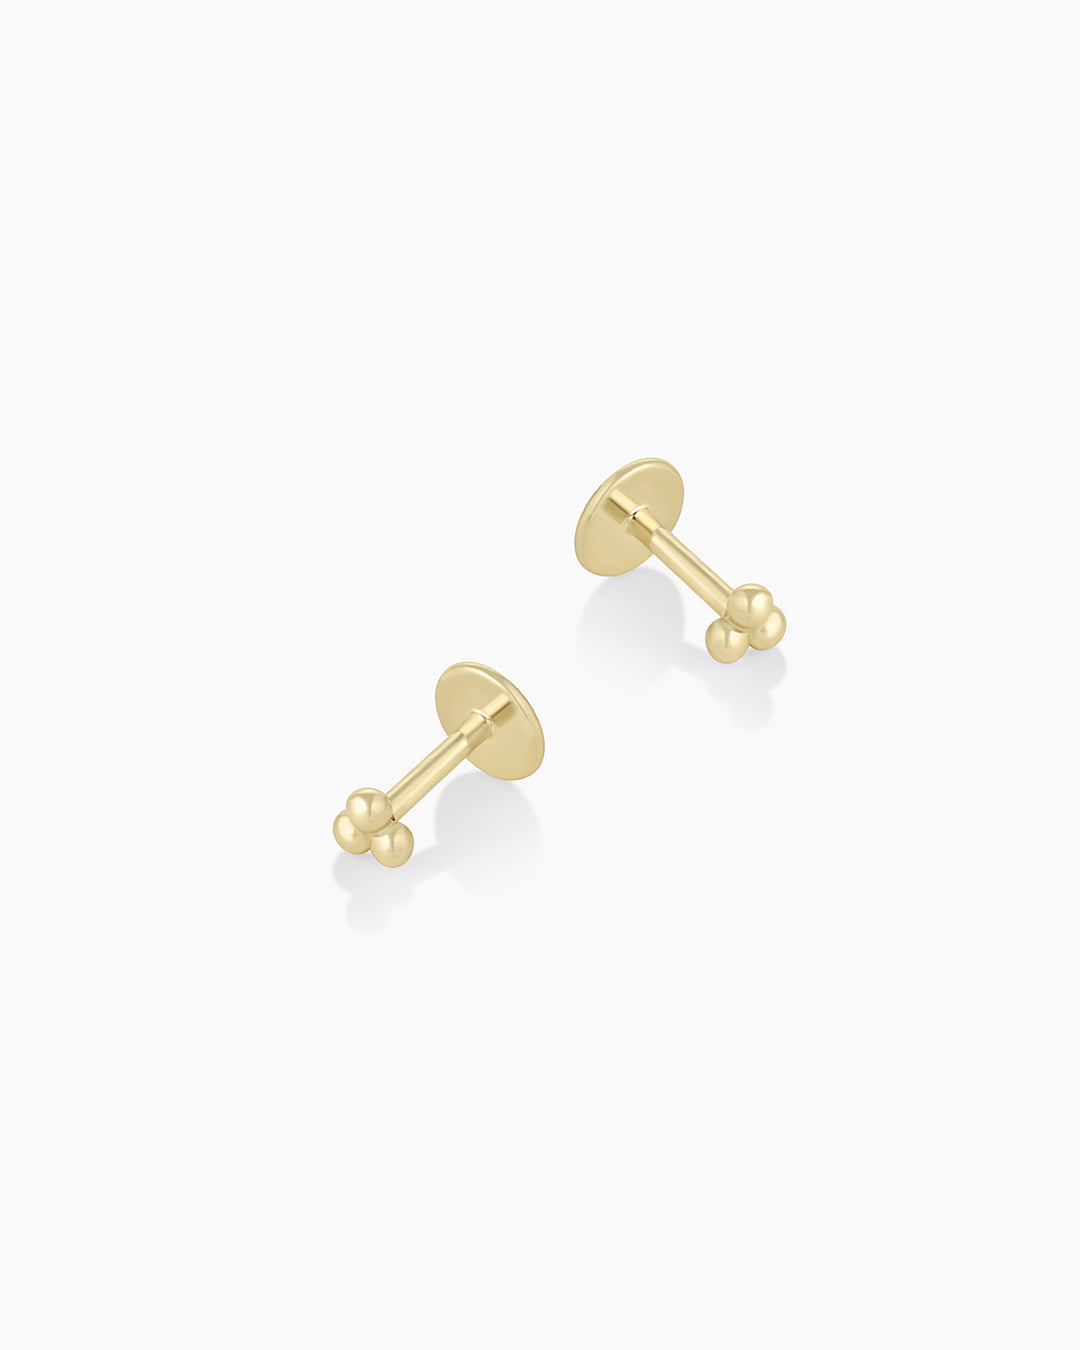 Our flatback studs are our best selling earrings for a reason 👀👂 Sho, earrings